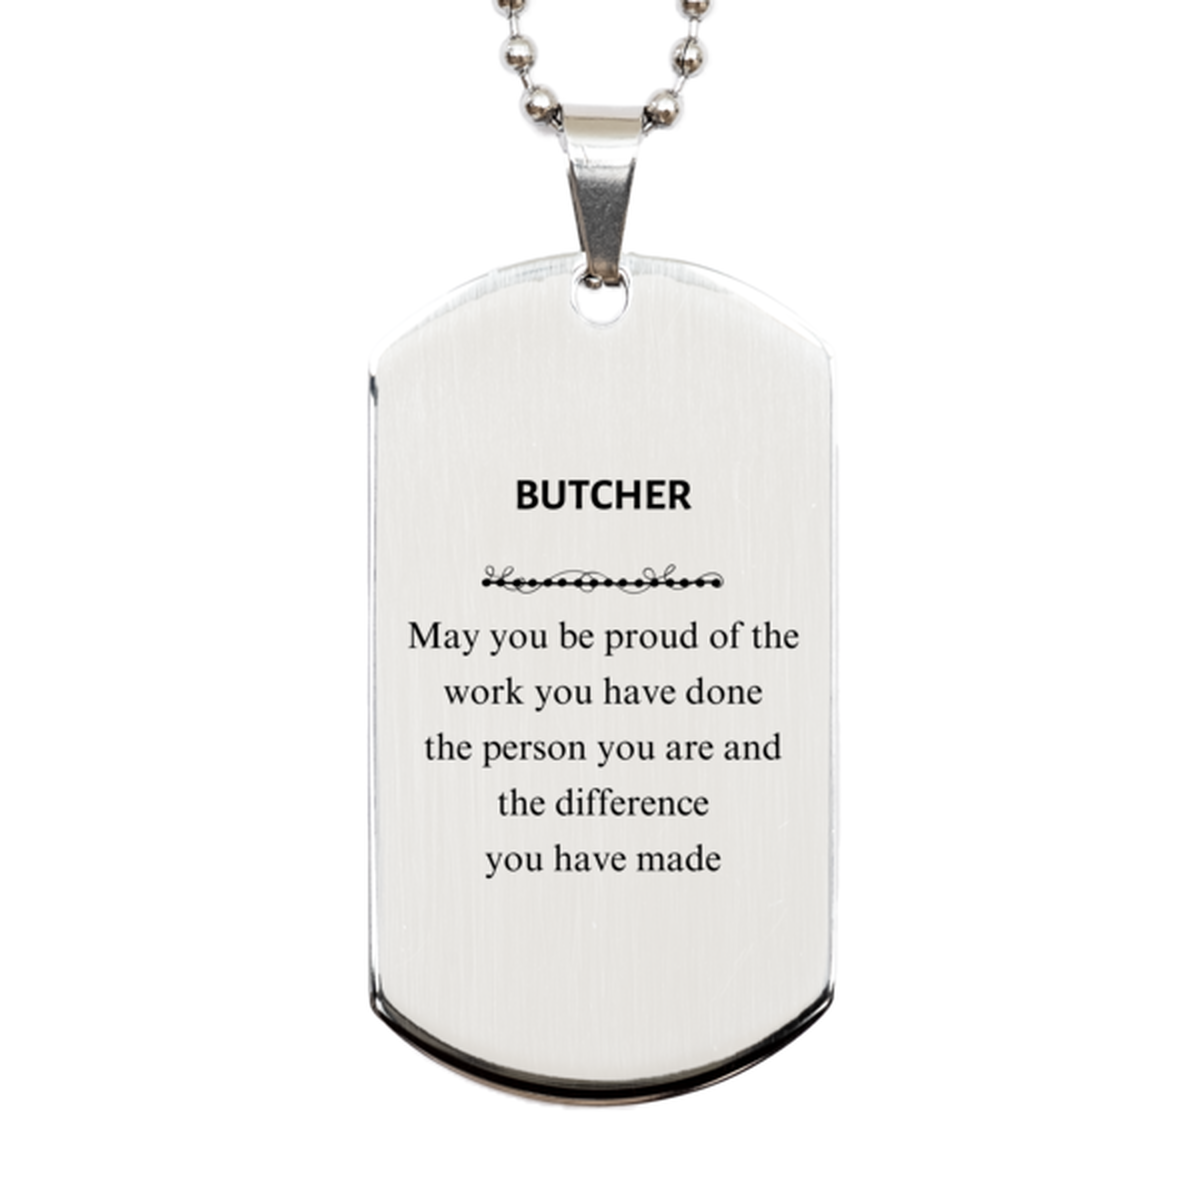 Butcher May you be proud of the work you have done, Retirement Butcher Silver Dog Tag for Colleague Appreciation Gifts Amazing for Butcher